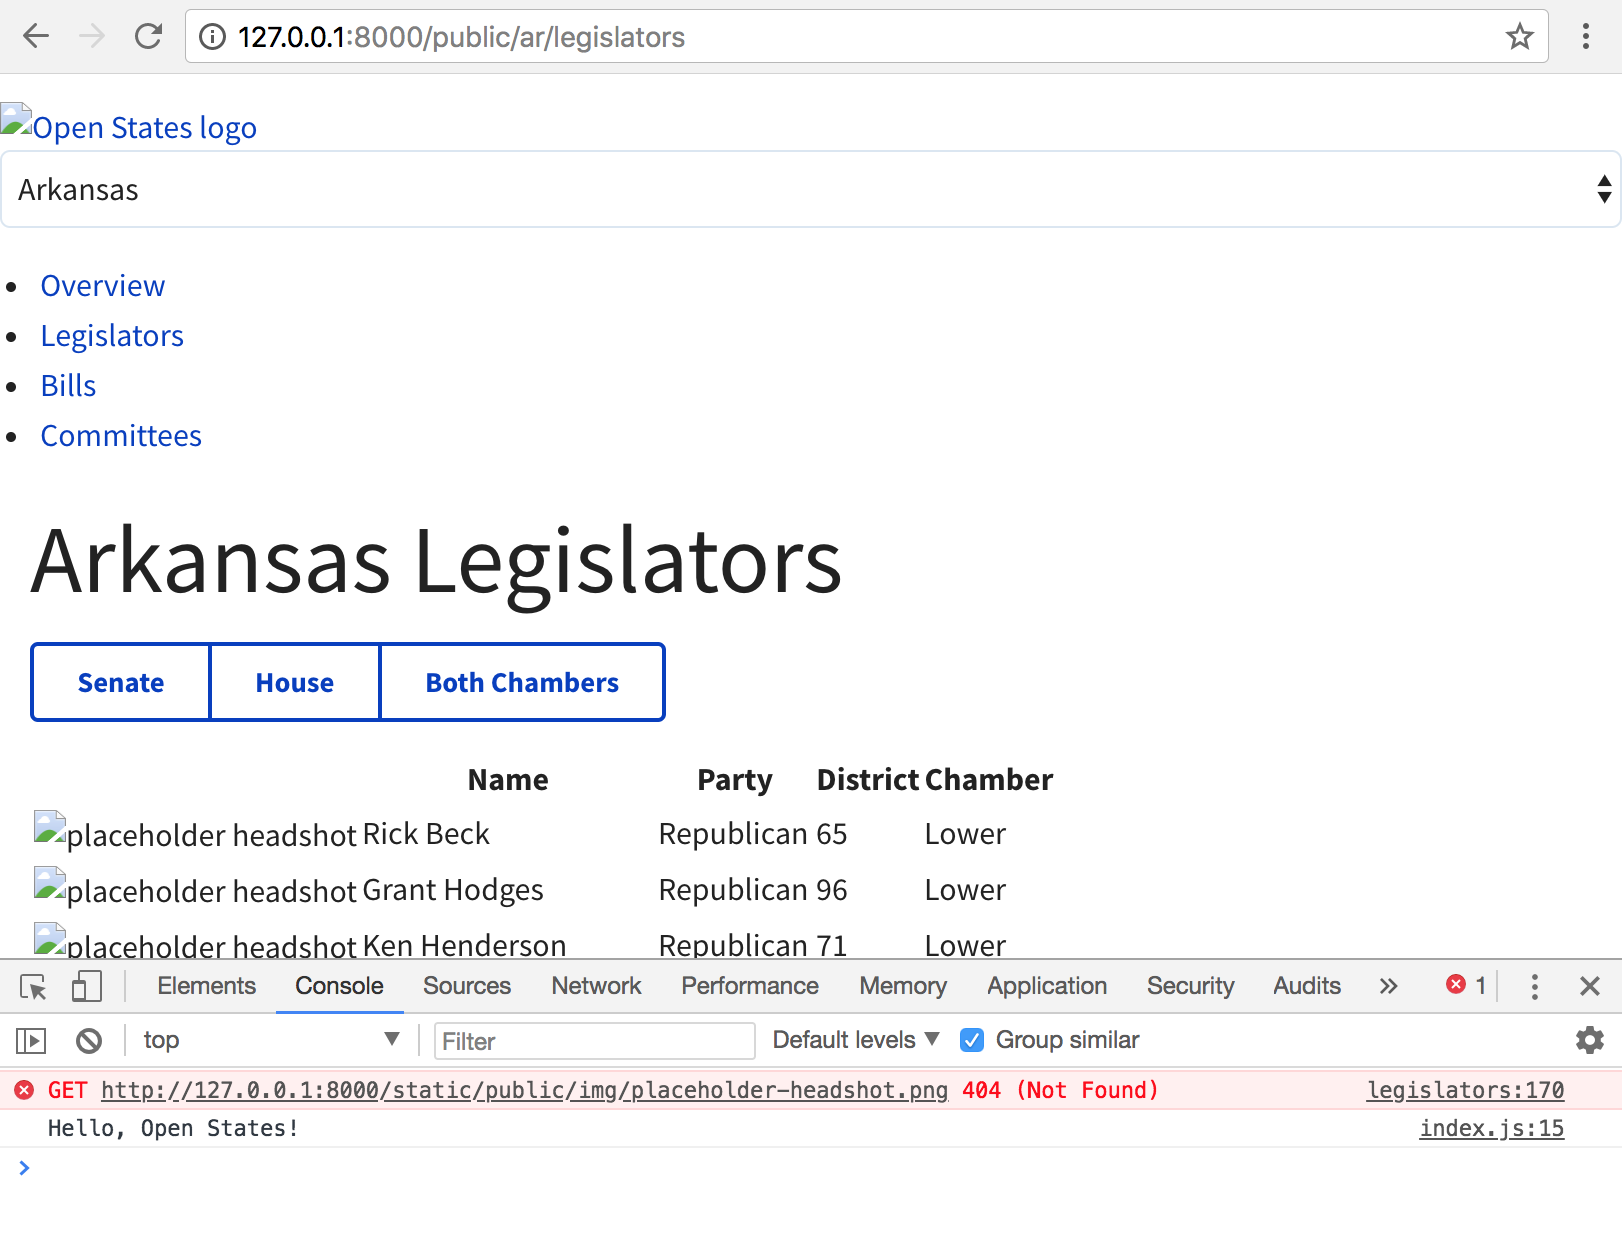 Our yet-to-be-styled legislator-list webpage